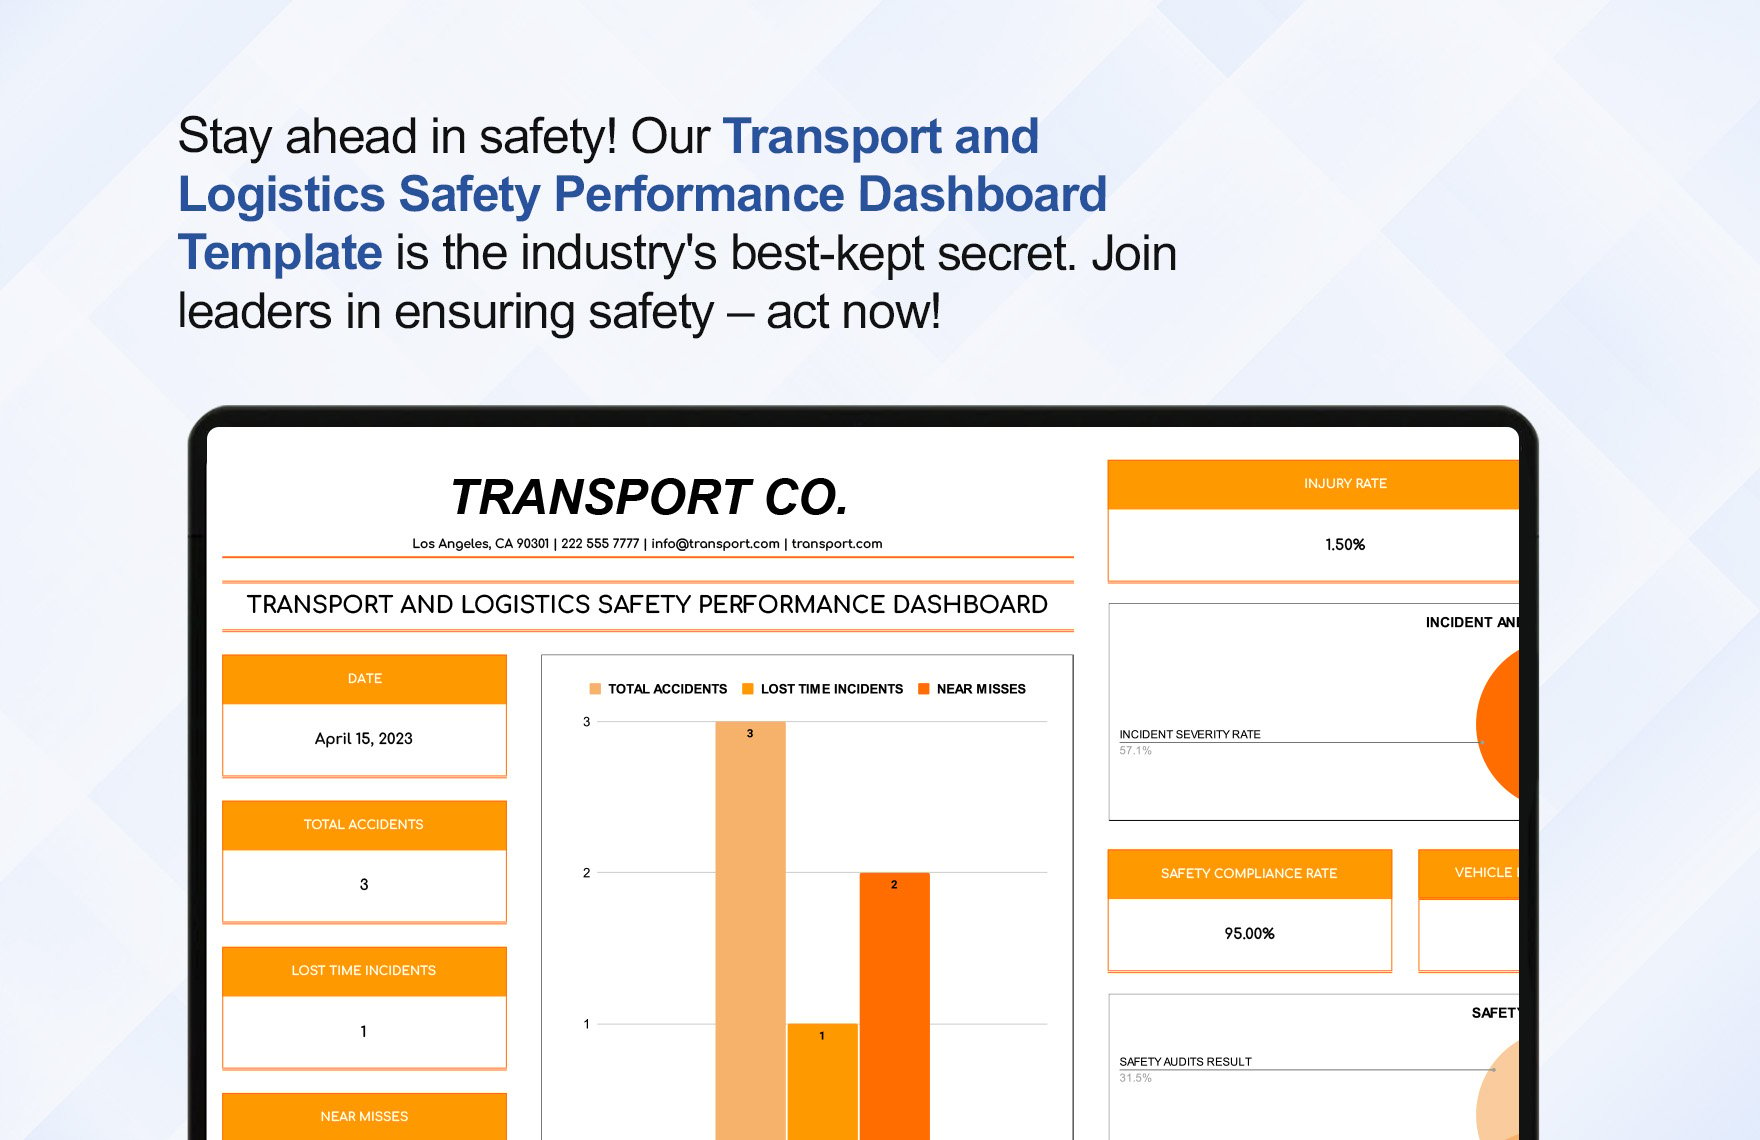 Transport and Logistics Safety Performance Dashboard Template